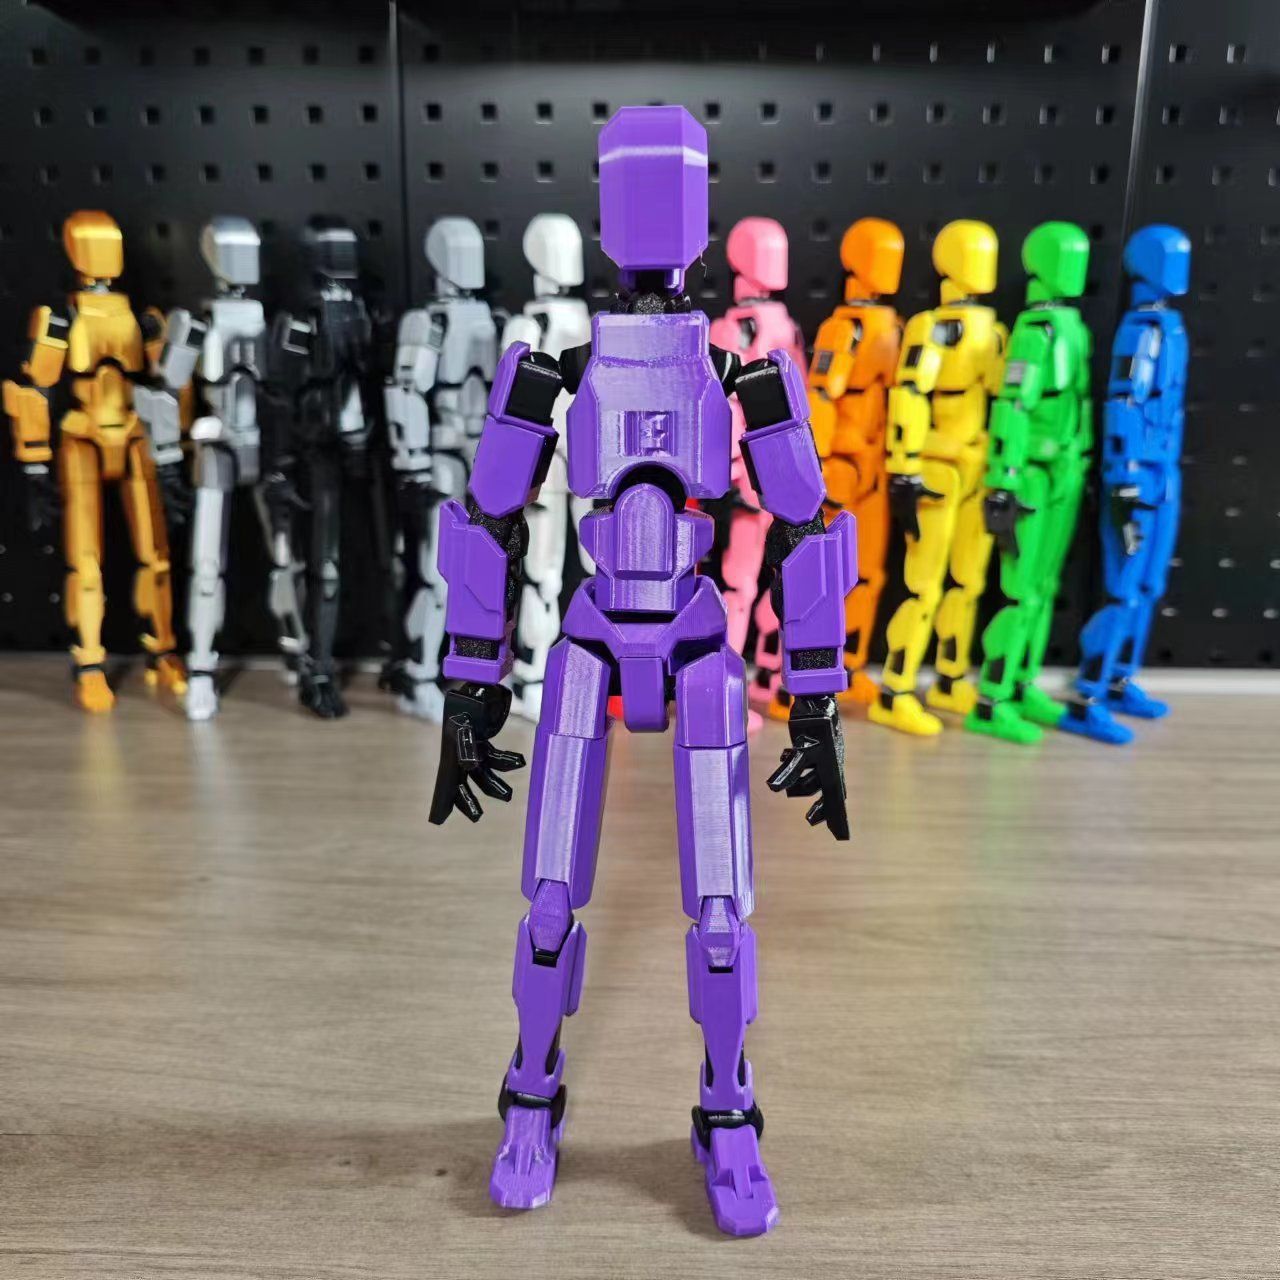 Multi-Jointed Movable Shapeshift Robot 2.0 3D Printed Mannequin Dummy Action Model Doll Toy Kid Gift